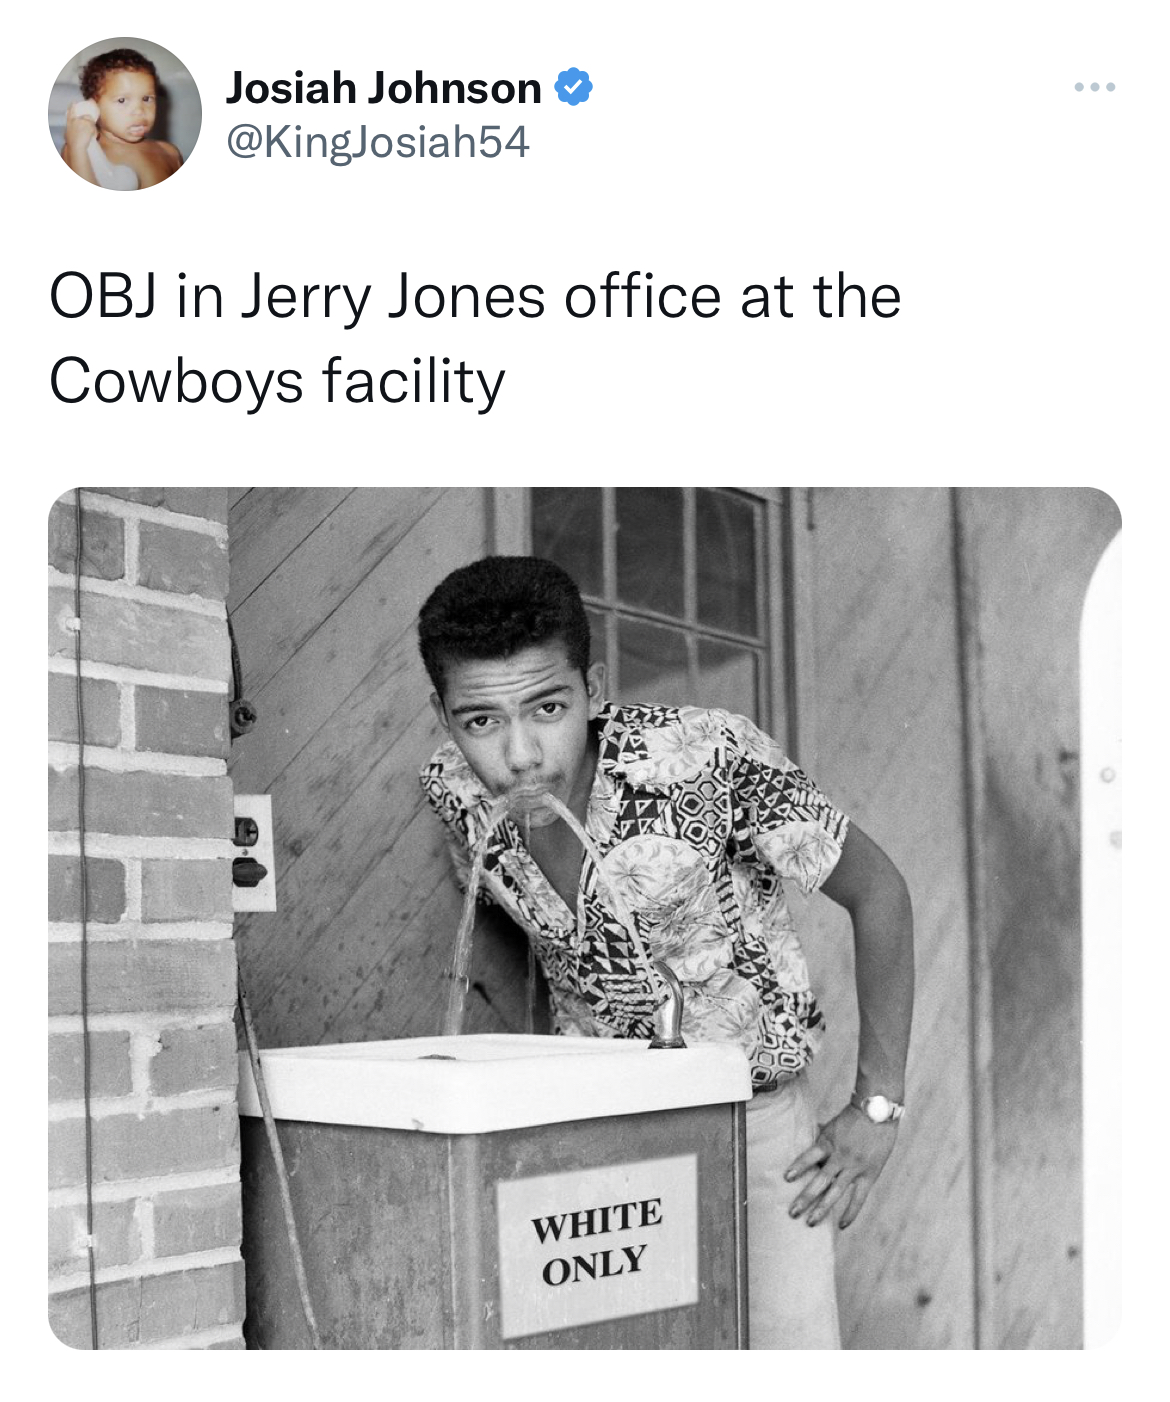 tweets roasting celebs - south carolina 1956 - Josiah Johnson Obj in Jerry Jones office at the Cowboys facility White Only